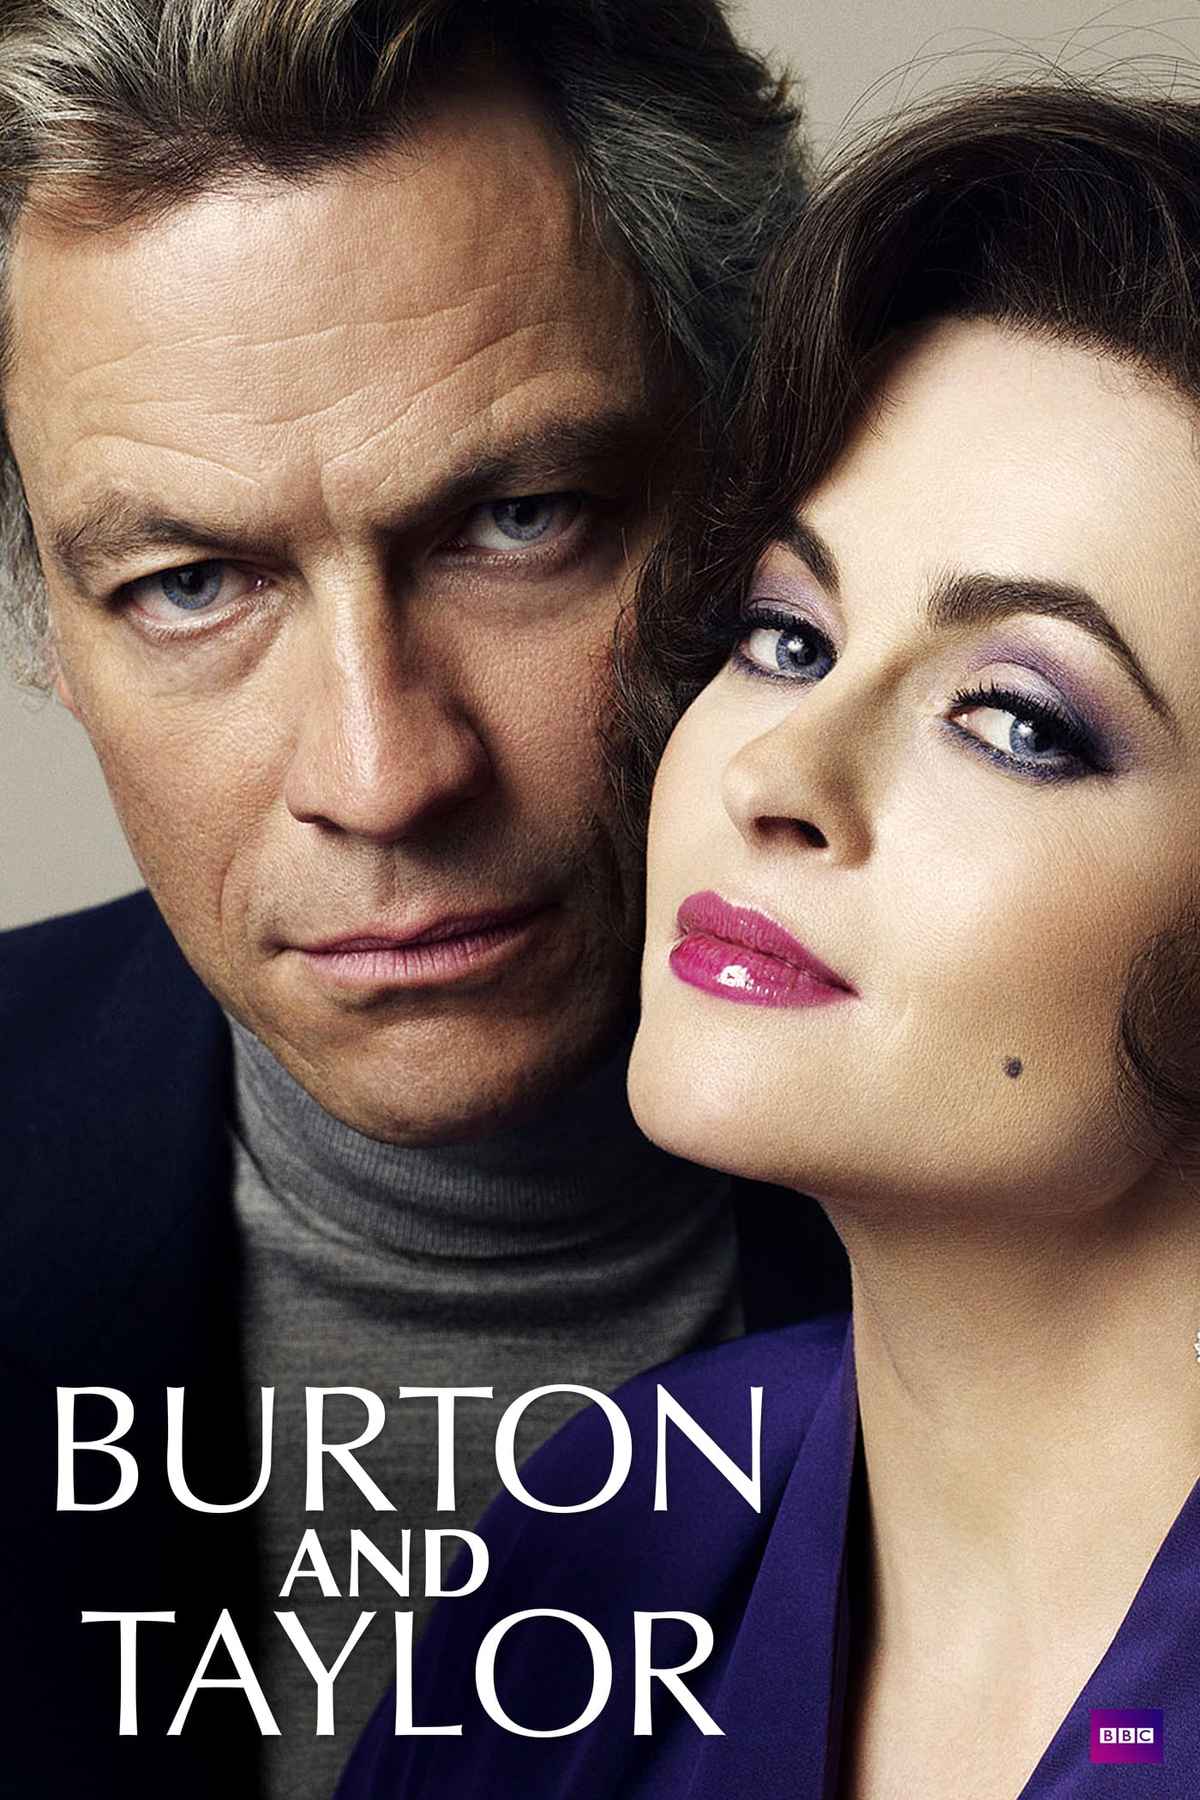 Burton and Taylor Movie (2013) Release Date, Cast, Trailer, Songs